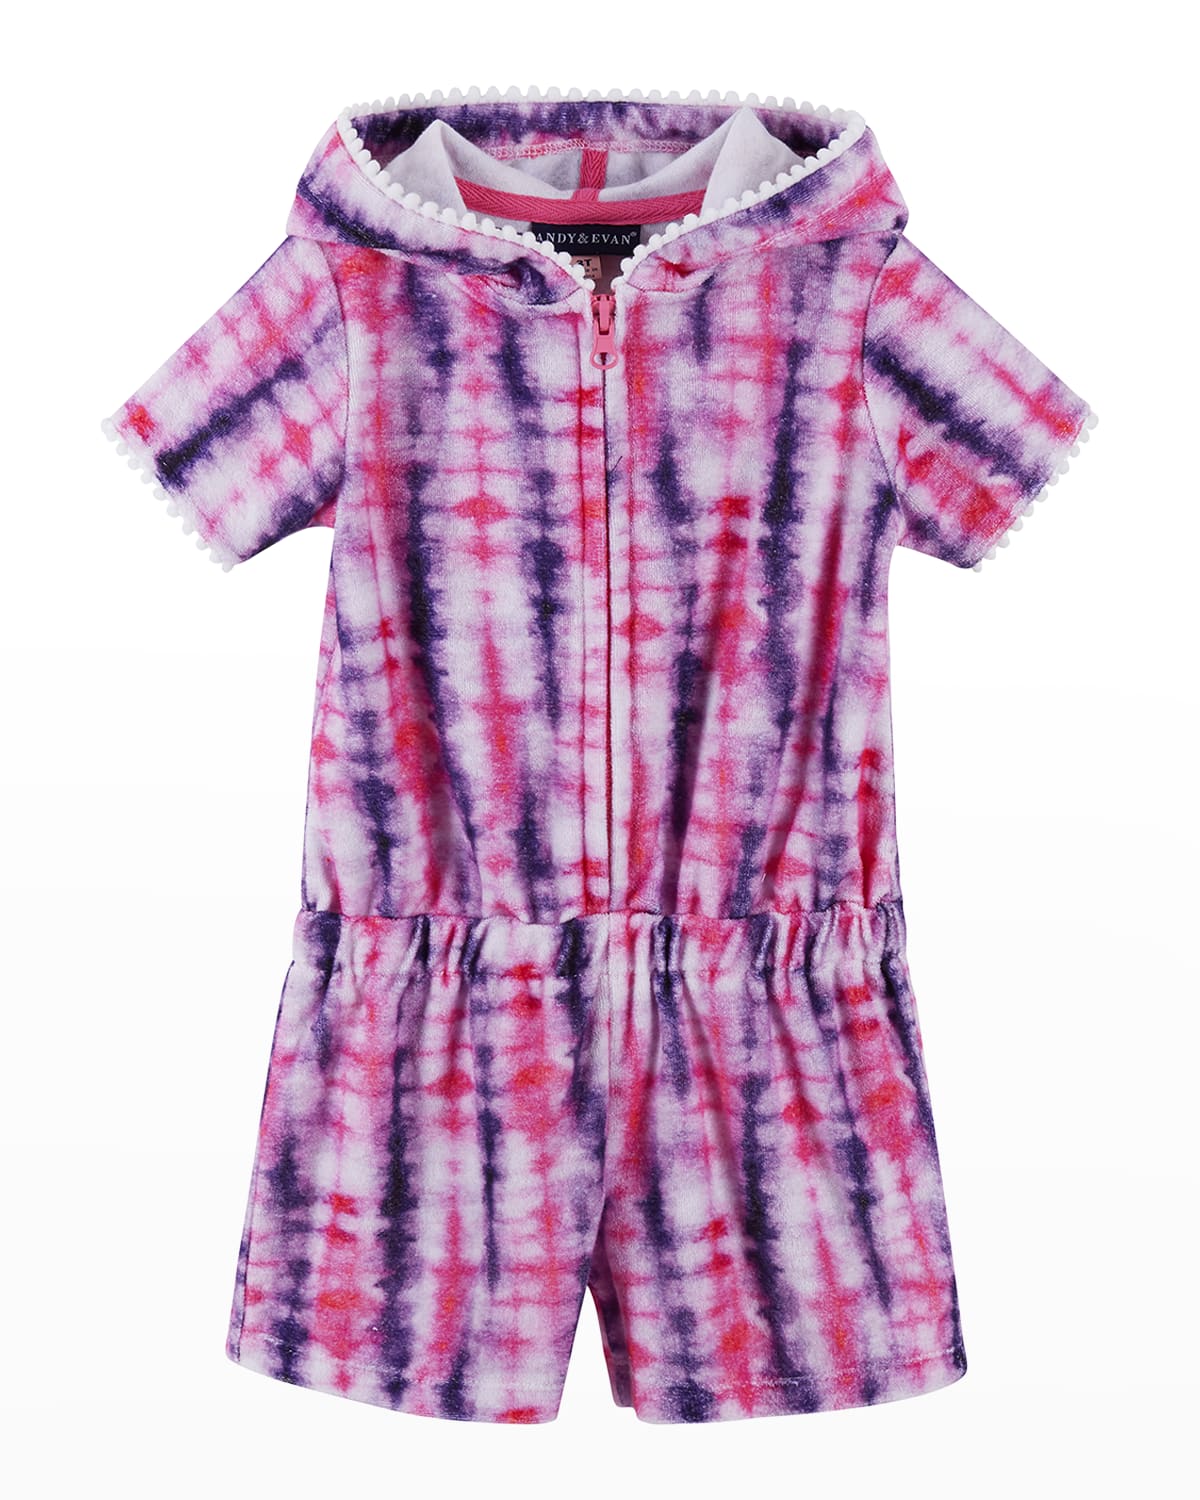 Andy & Evan Kids' Girl's French Terry Cover Up In Purple Tie Dye